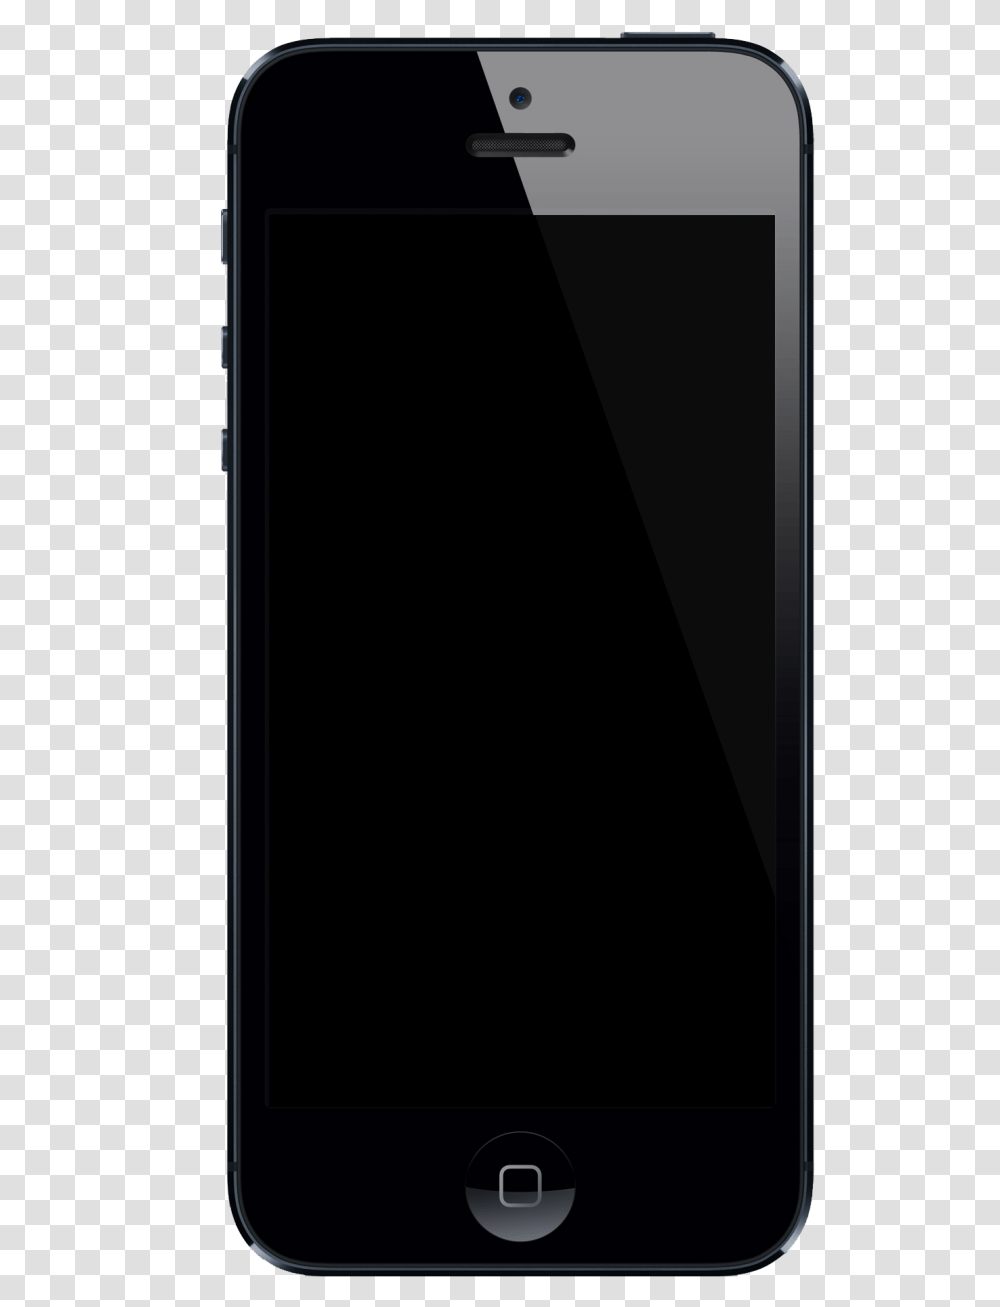 Blank Iphone Screen Iphone 5 With A Black Screen, Mobile Phone, Electronics, Cell Phone Transparent Png